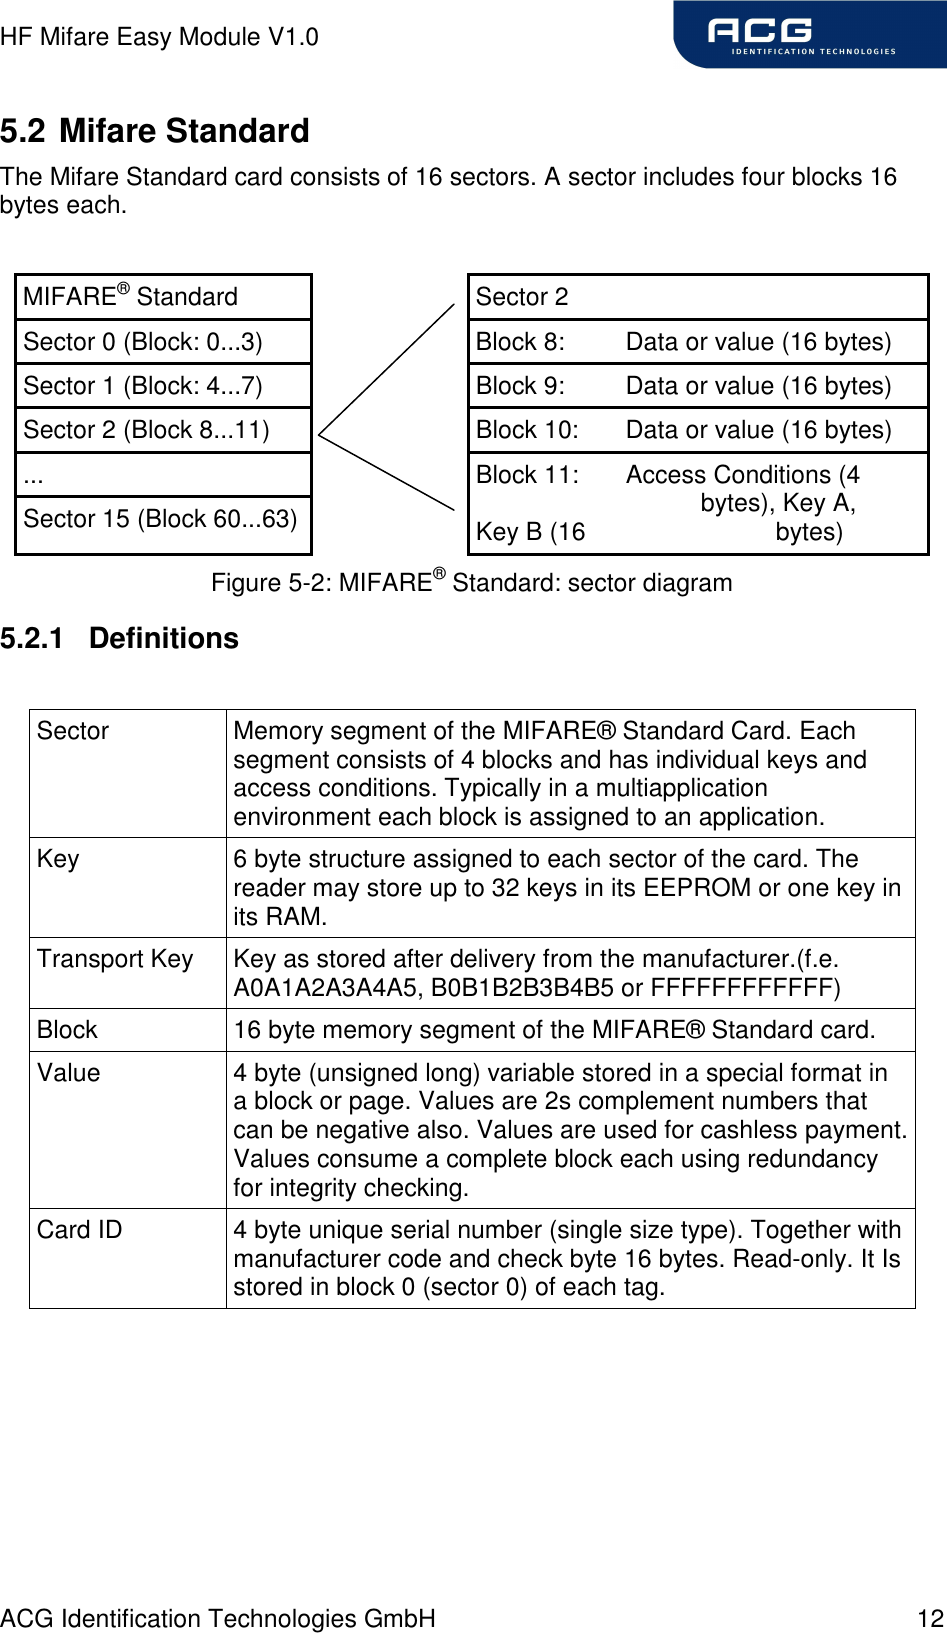 HF Mifare Easy Module V1.0 ACG Identification Technologies GmbH  12 5.2 Mifare Standard The Mifare Standard card consists of 16 sectors. A sector includes four blocks 16 bytes each.  MIFARE® Standard    Sector 2 Sector 0 (Block: 0...3)    Block 8:   Data or value (16 bytes) Sector 1 (Block: 4...7)    Block 9:   Data or value (16 bytes) Sector 2 (Block 8...11)    Block 10:   Data or value (16 bytes) ...   Sector 15 (Block 60...63)  Block 11:   Access Conditions (4       bytes), Key A, Key B (16       bytes) Figure 5-2: MIFARE® Standard: sector diagram 5.2.1  Definitions  Sector  Memory segment of the MIFARE® Standard Card. Each segment consists of 4 blocks and has individual keys and access conditions. Typically in a multiapplication environment each block is assigned to an application. Key  6 byte structure assigned to each sector of the card. The reader may store up to 32 keys in its EEPROM or one key in its RAM.  Transport Key  Key as stored after delivery from the manufacturer.(f.e. A0A1A2A3A4A5, B0B1B2B3B4B5 or FFFFFFFFFFFF) Block  16 byte memory segment of the MIFARE® Standard card. Value  4 byte (unsigned long) variable stored in a special format in a block or page. Values are 2s complement numbers that can be negative also. Values are used for cashless payment. Values consume a complete block each using redundancy for integrity checking. Card ID  4 byte unique serial number (single size type). Together with manufacturer code and check byte 16 bytes. Read-only. It Is stored in block 0 (sector 0) of each tag.  